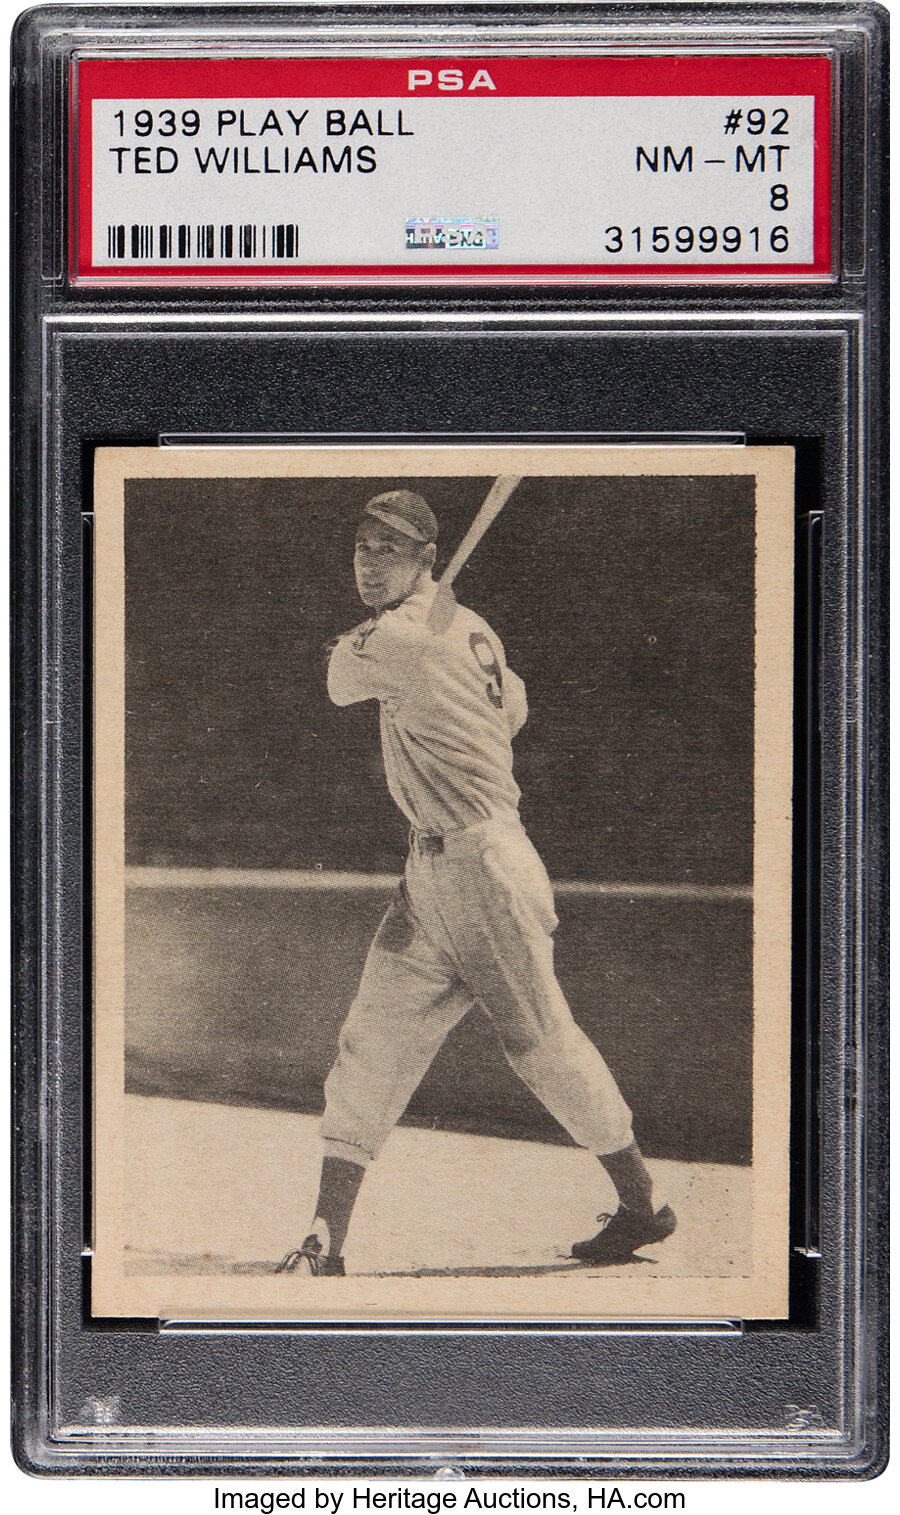 1939 Play Ball Ted Williams Rookie #92 PSA NM-MT 8